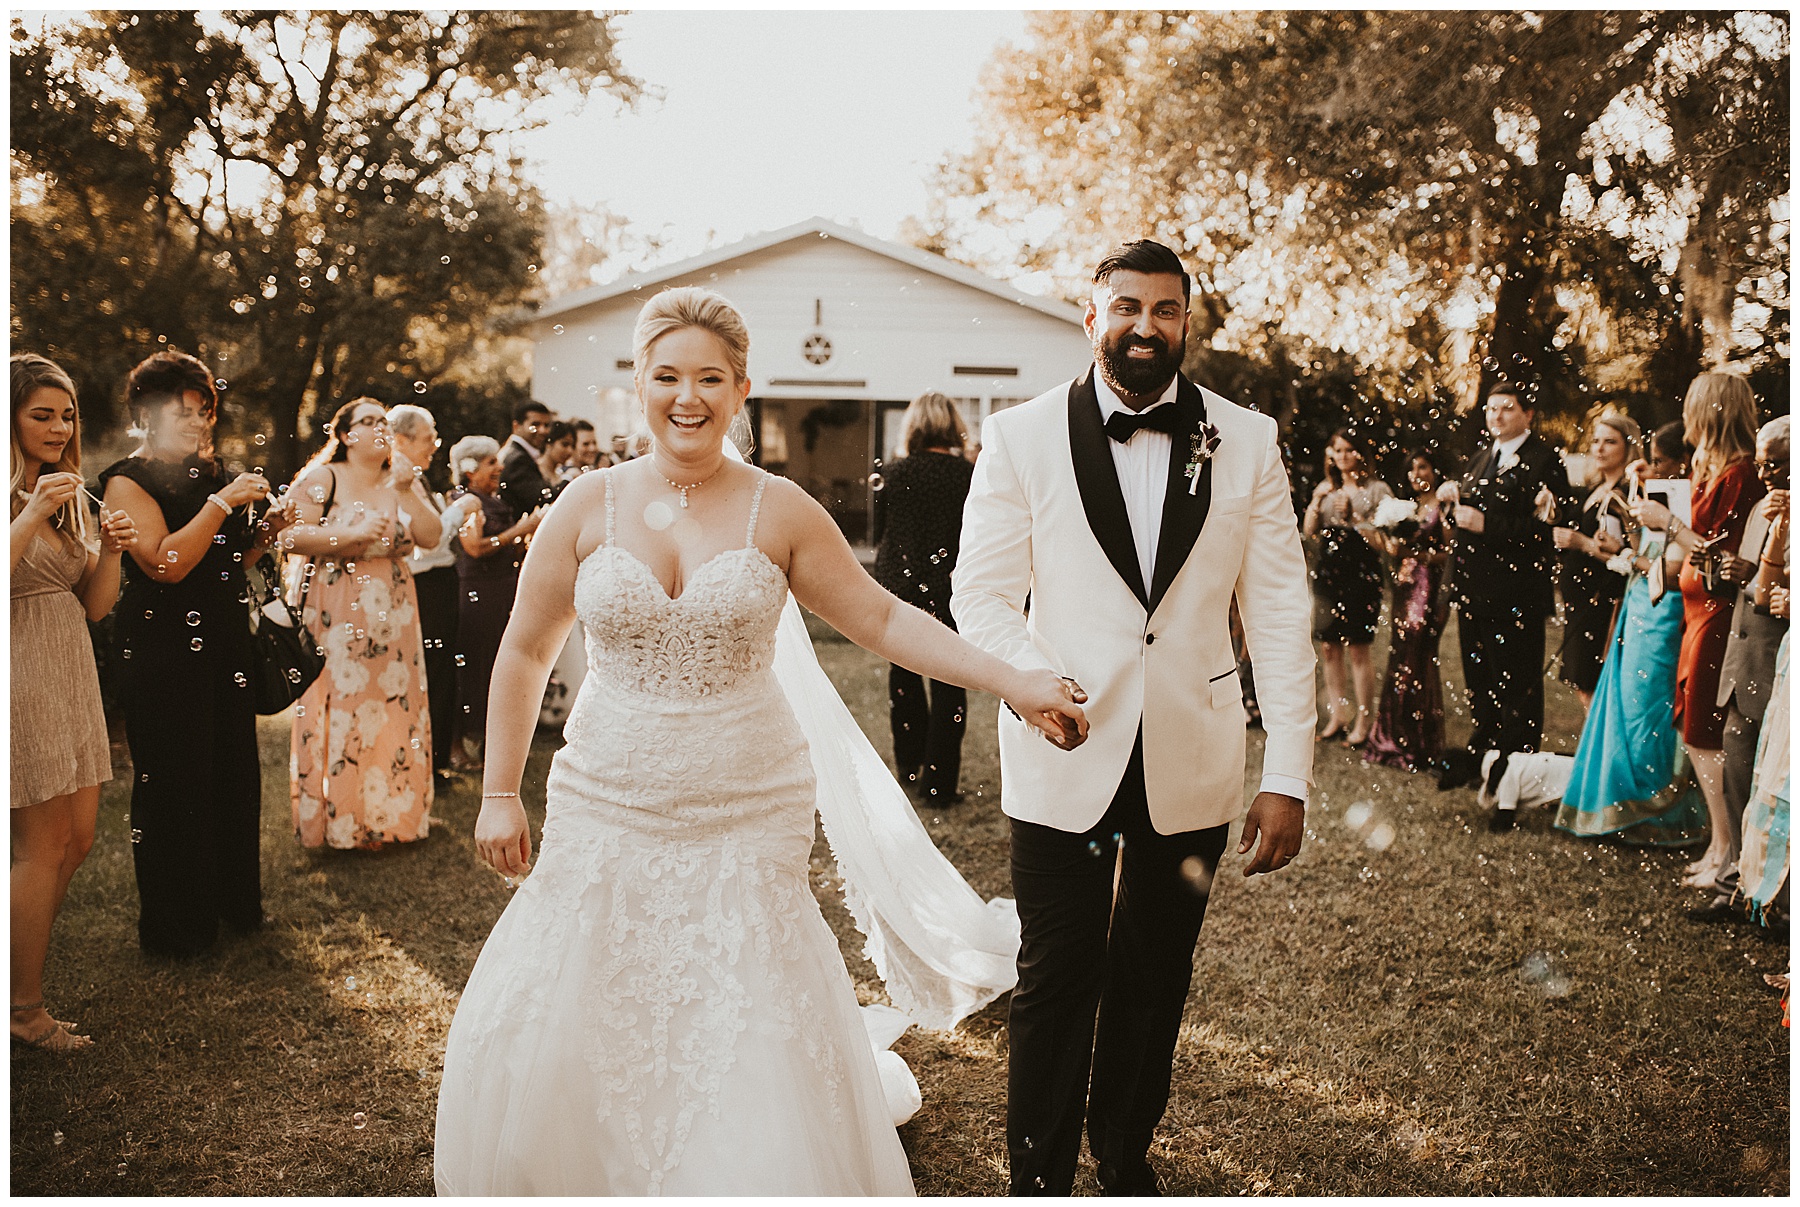 Multi cultural wedding ceremony at Cross Creek Ranch, in Dover Florida - Photographed by Juju Photography - Destination wedding photographer